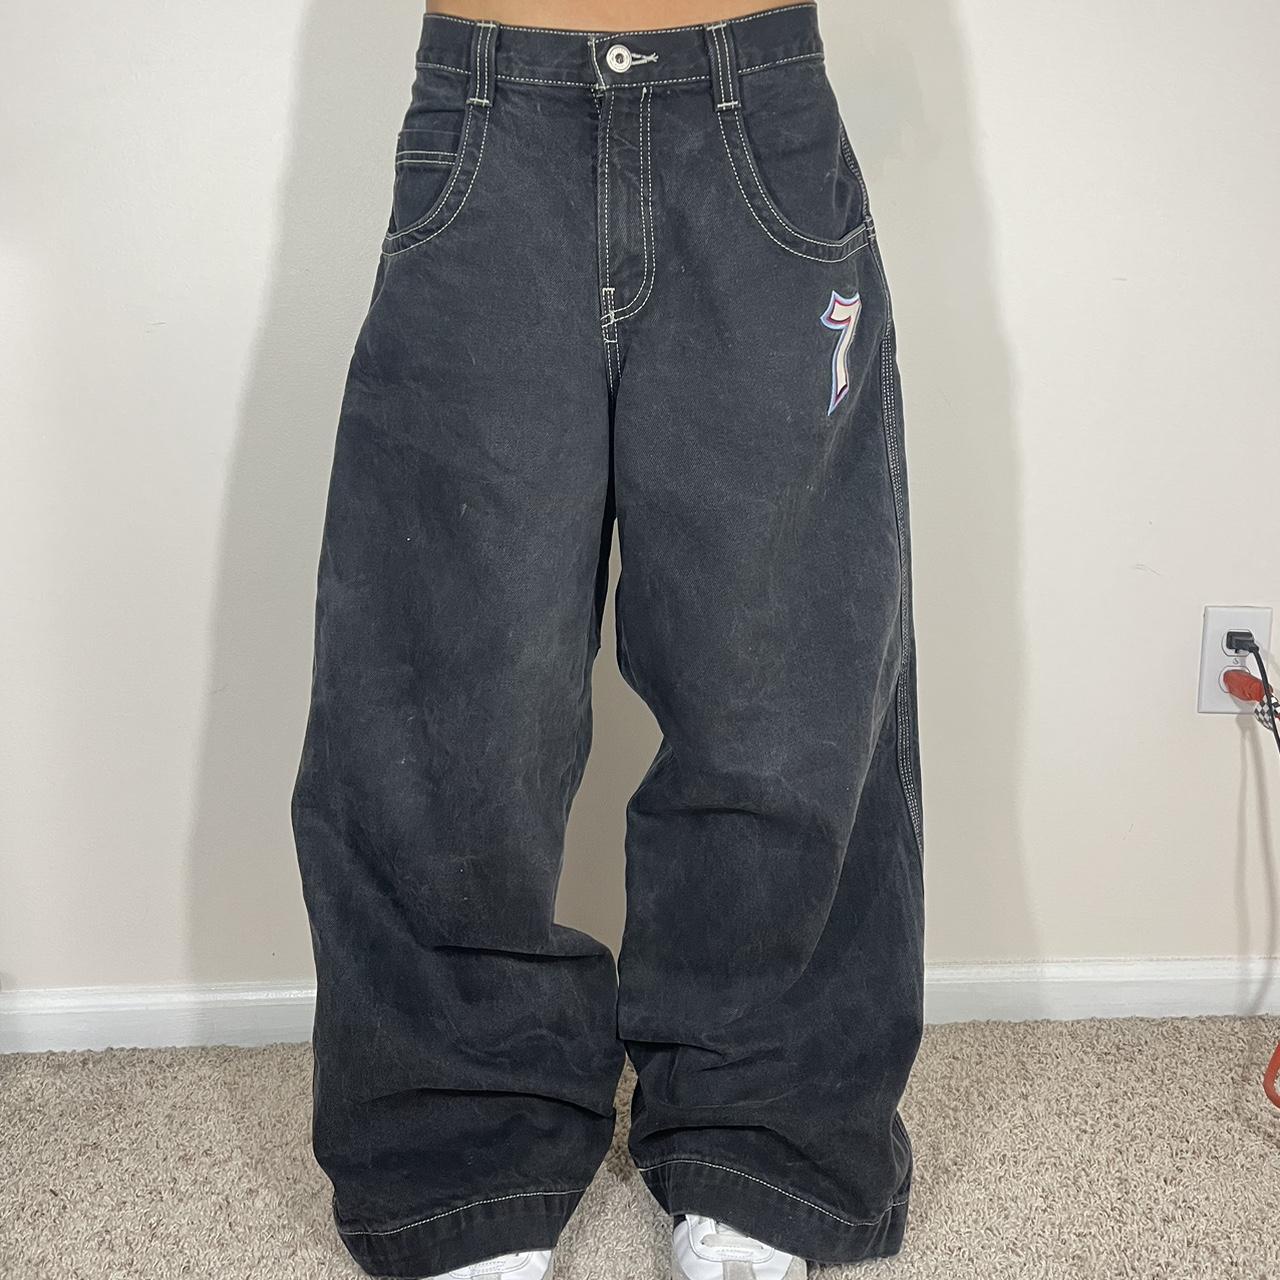 RARE JNCO 7 Dice Black Jeans, - Very rare find and